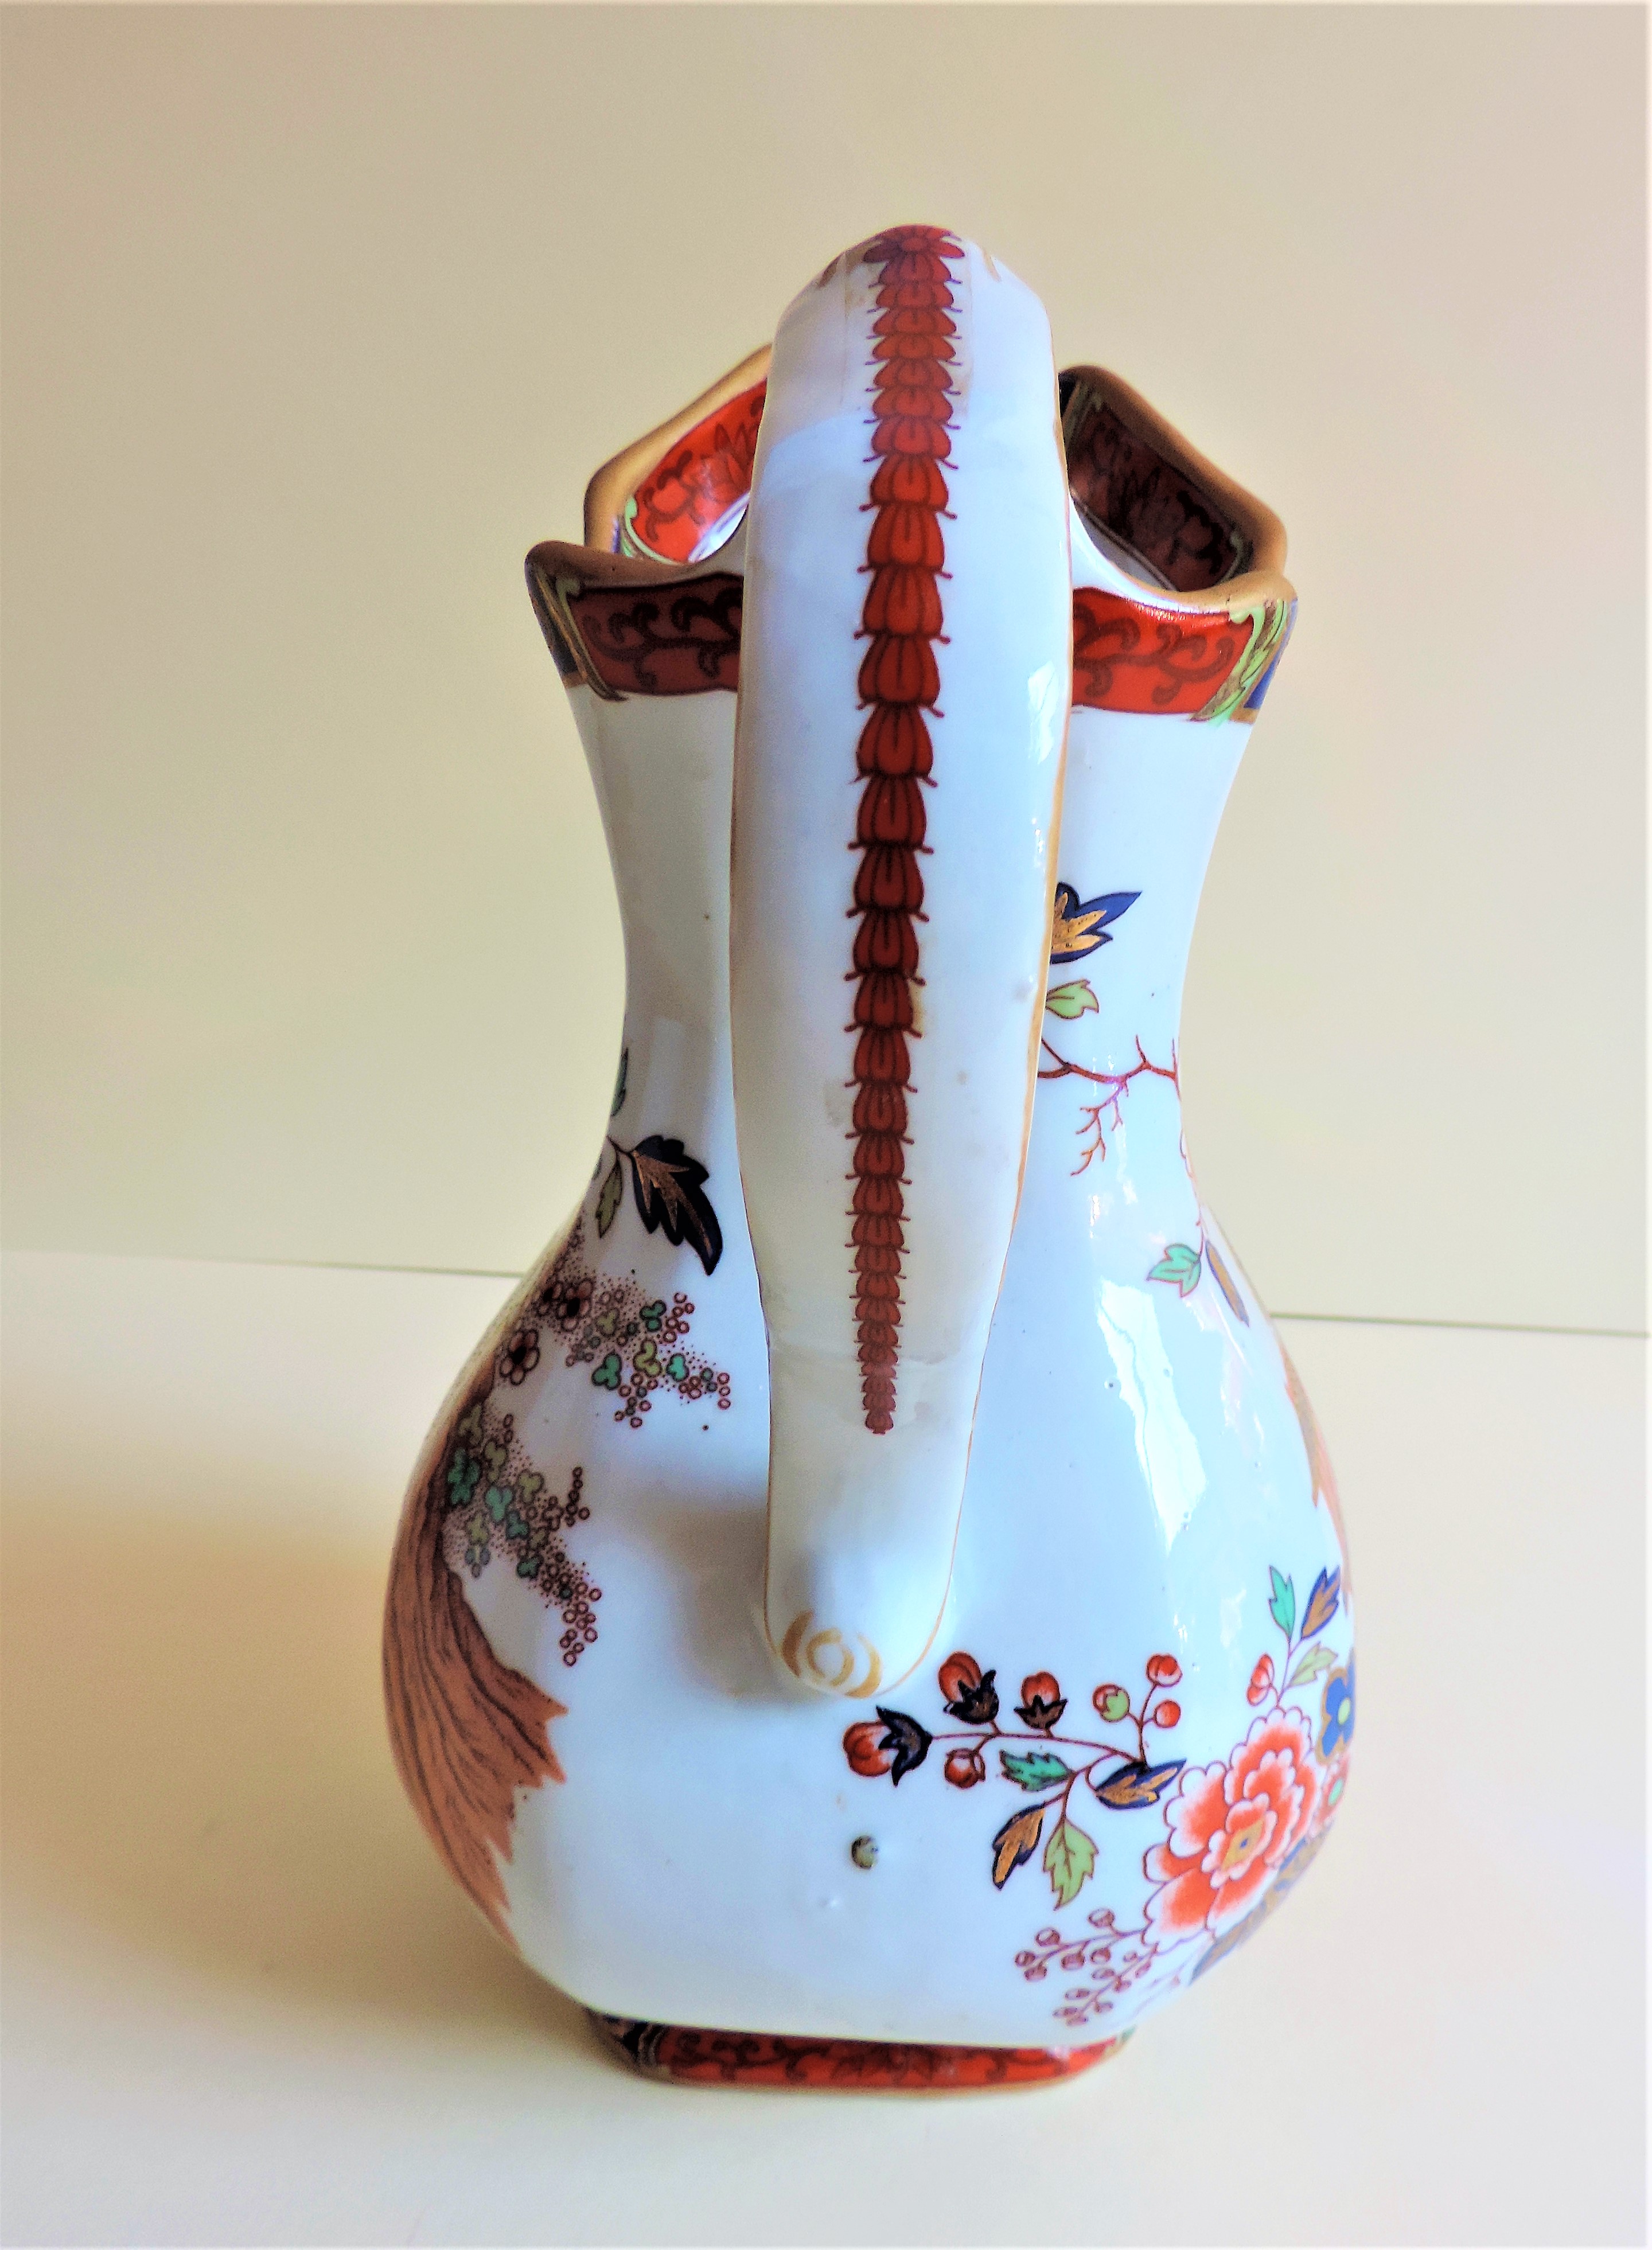 Antique Ironstone China Jug Hand Painted 23cm Tall - Image 4 of 7